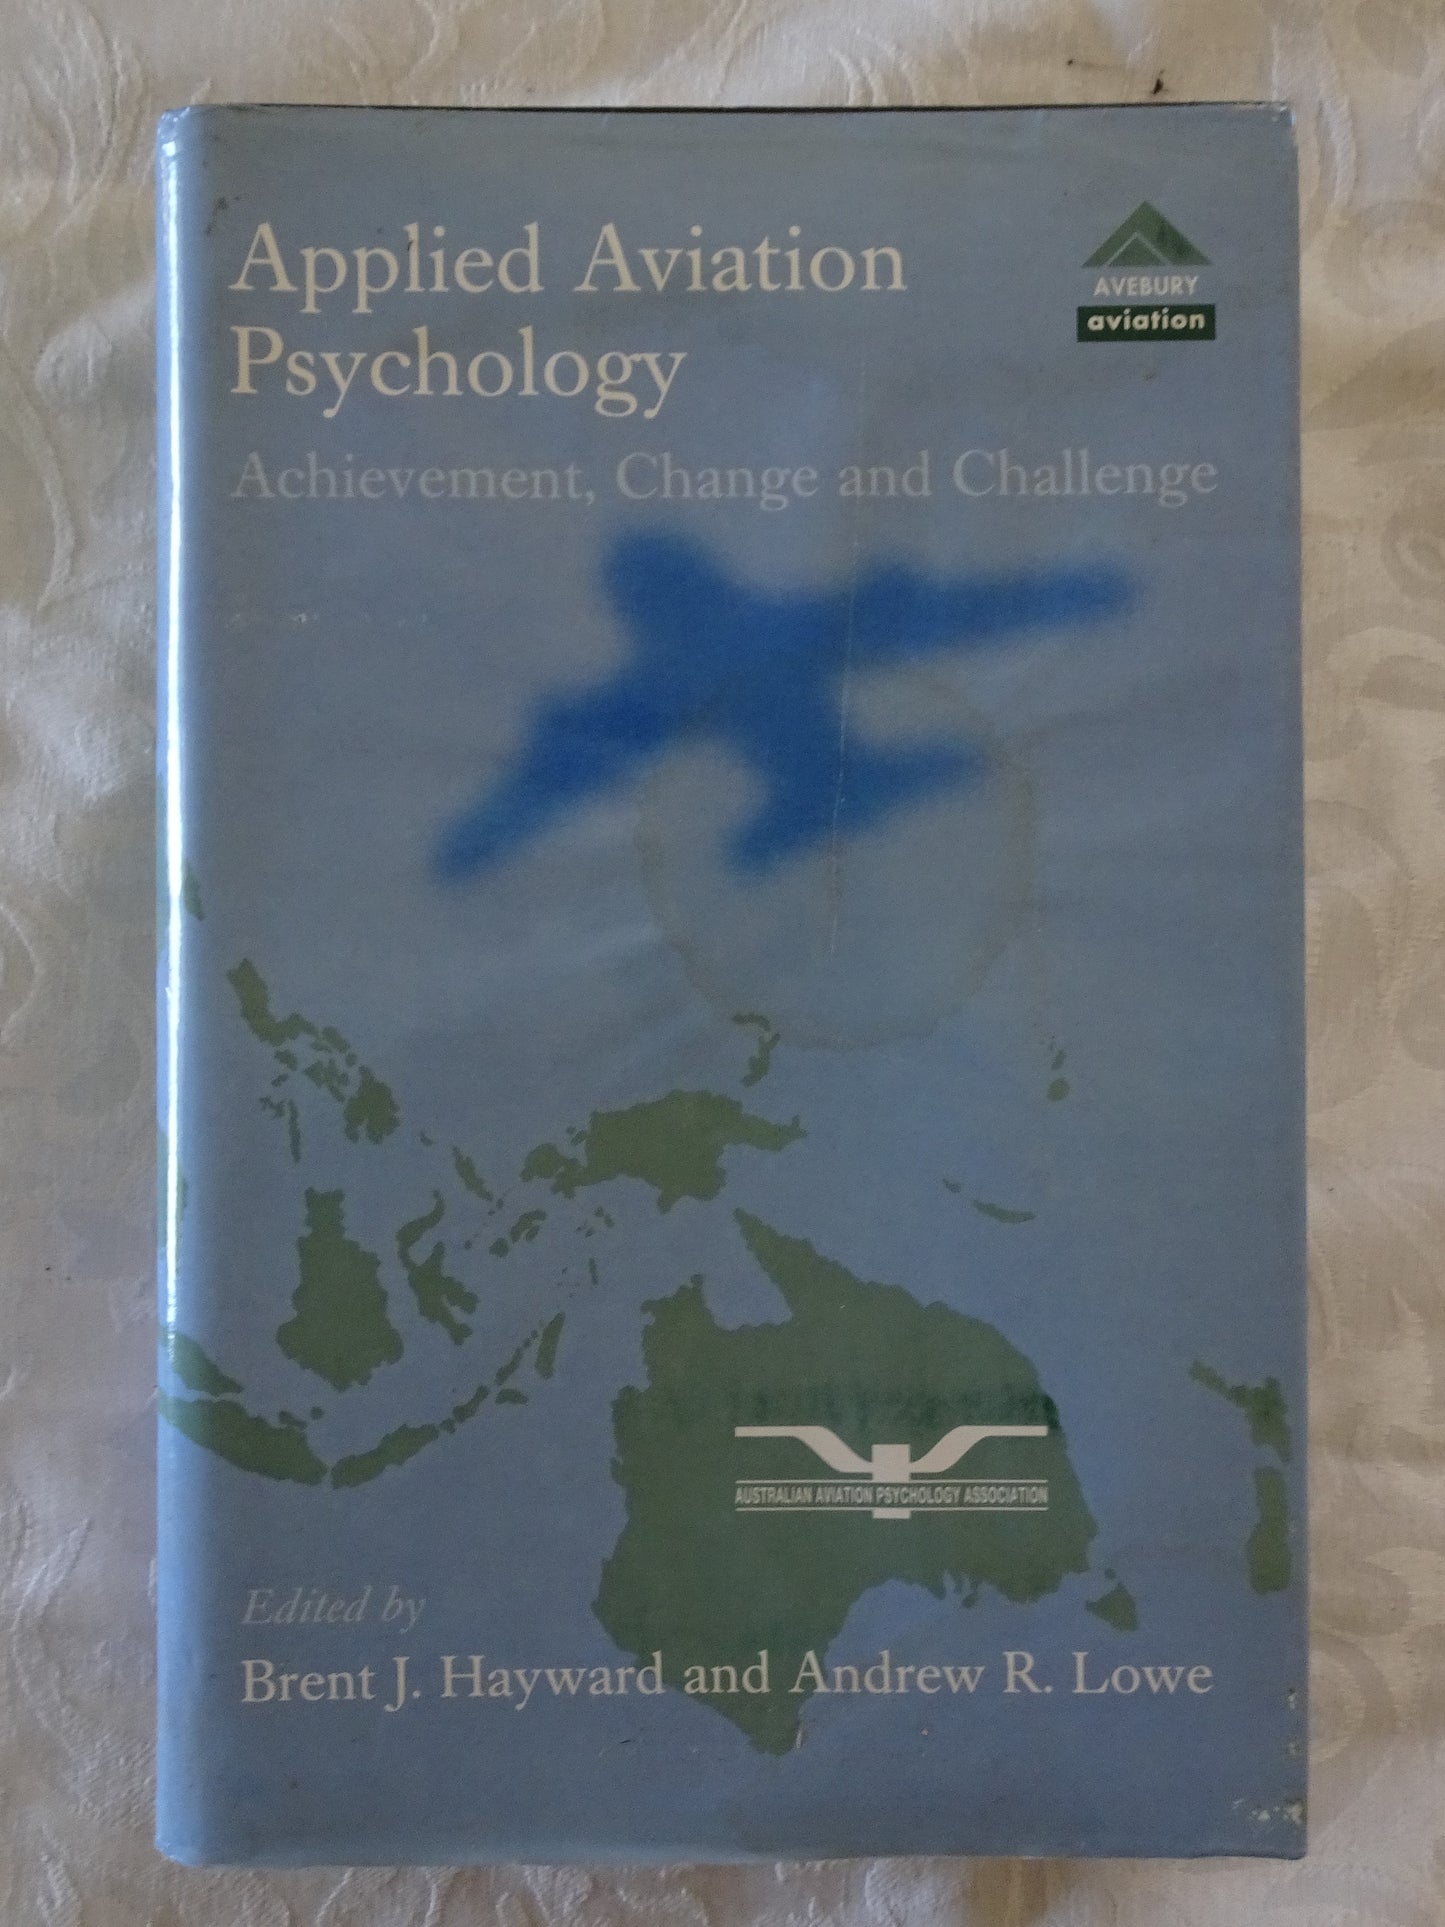 Applied Aviation Psychology by Brent J. Hayward and Andrew R. Lowe